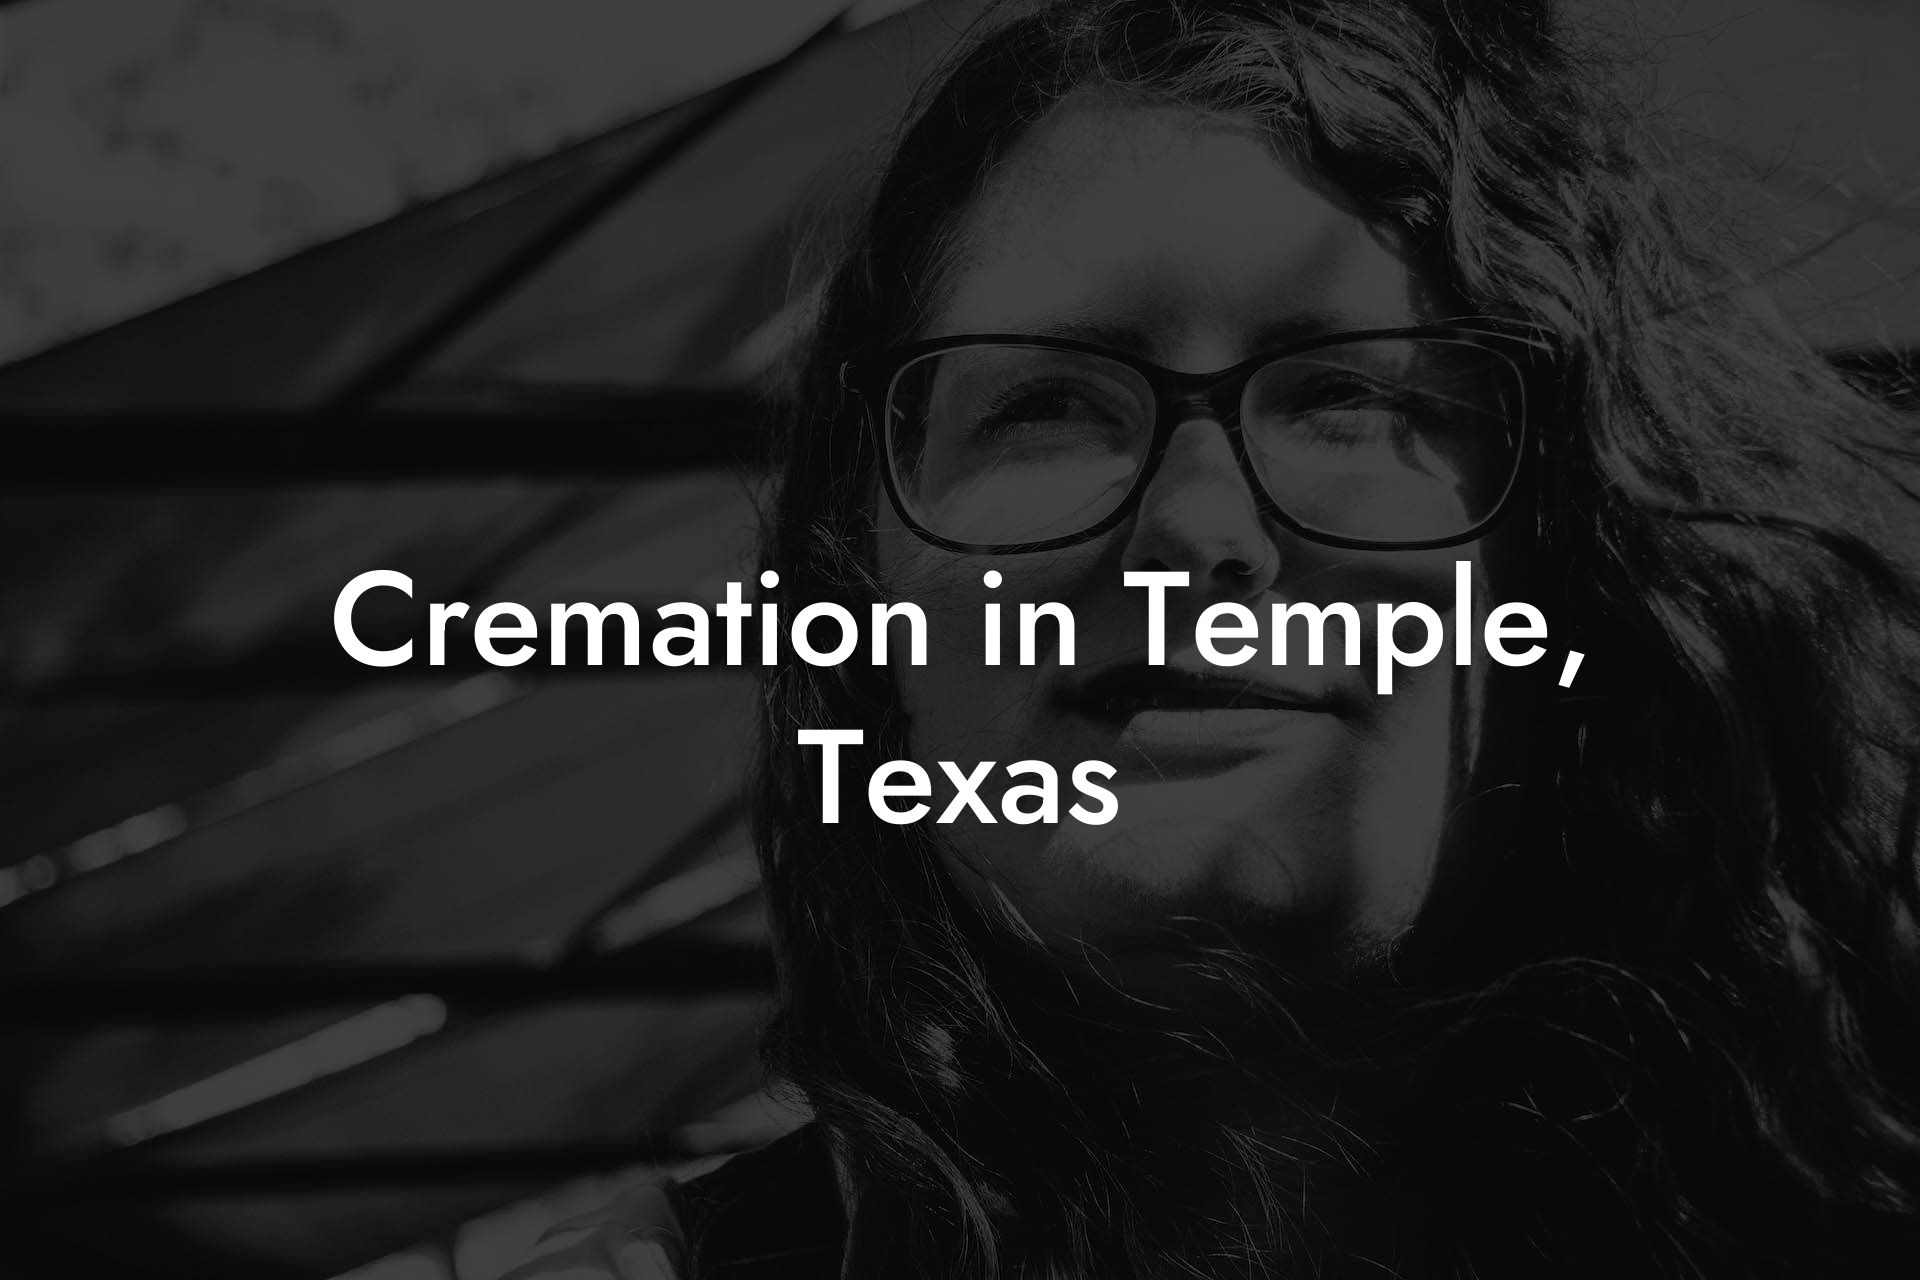 Cremation in Temple, Texas